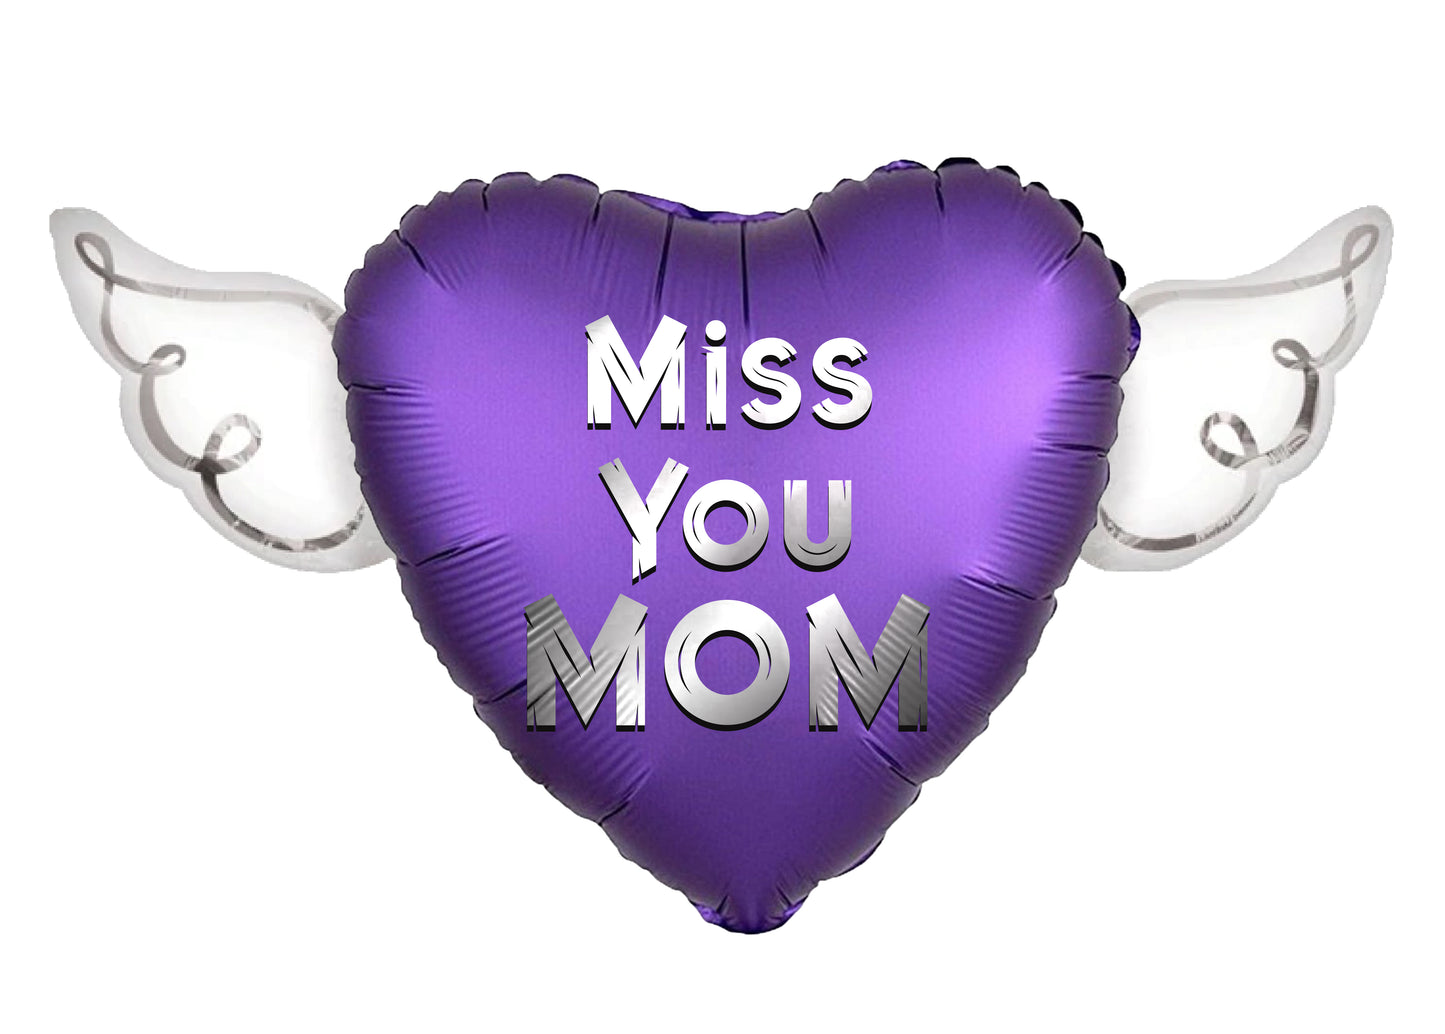 Miss You Mom Heavenly Balloons Heart Shaped with angel wings (Purple)